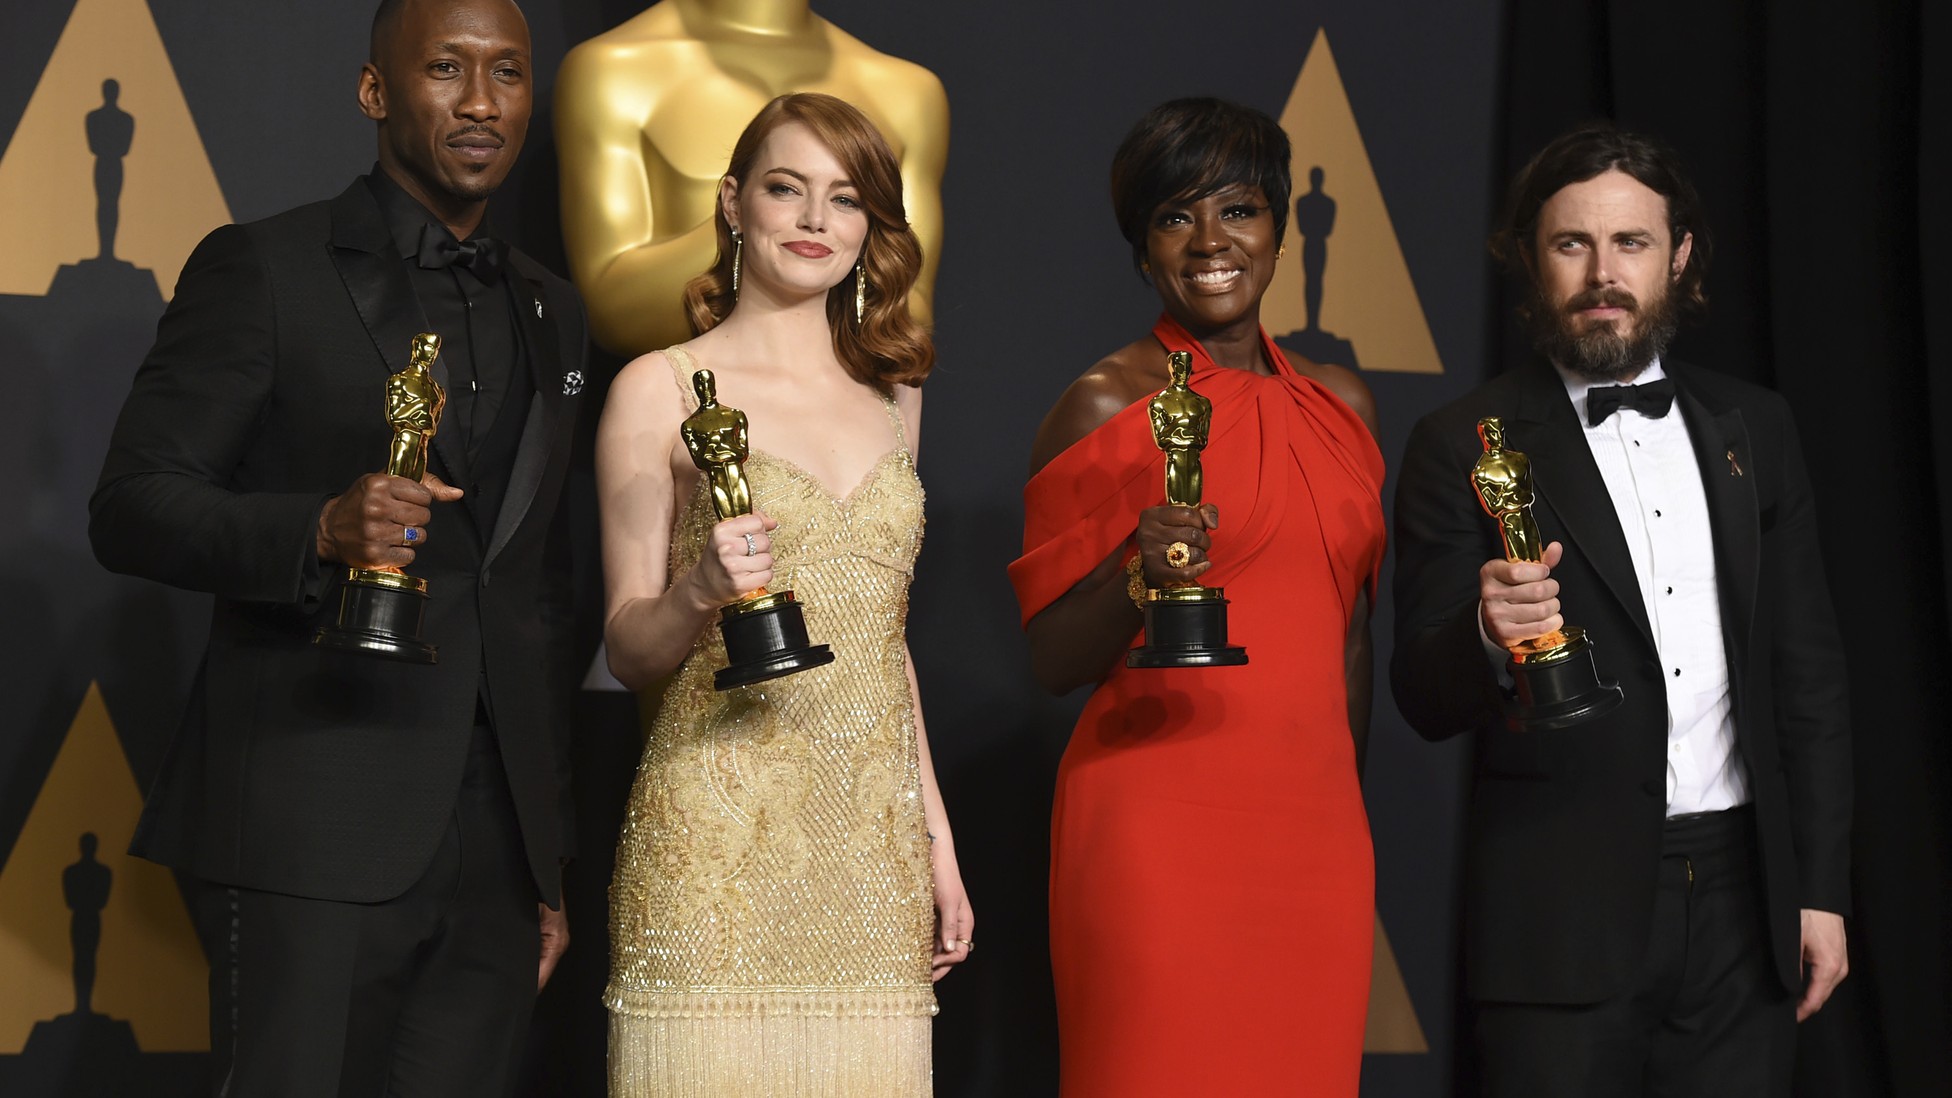 Should Acting Awards Be Gender-Neutral? - The Atlantic